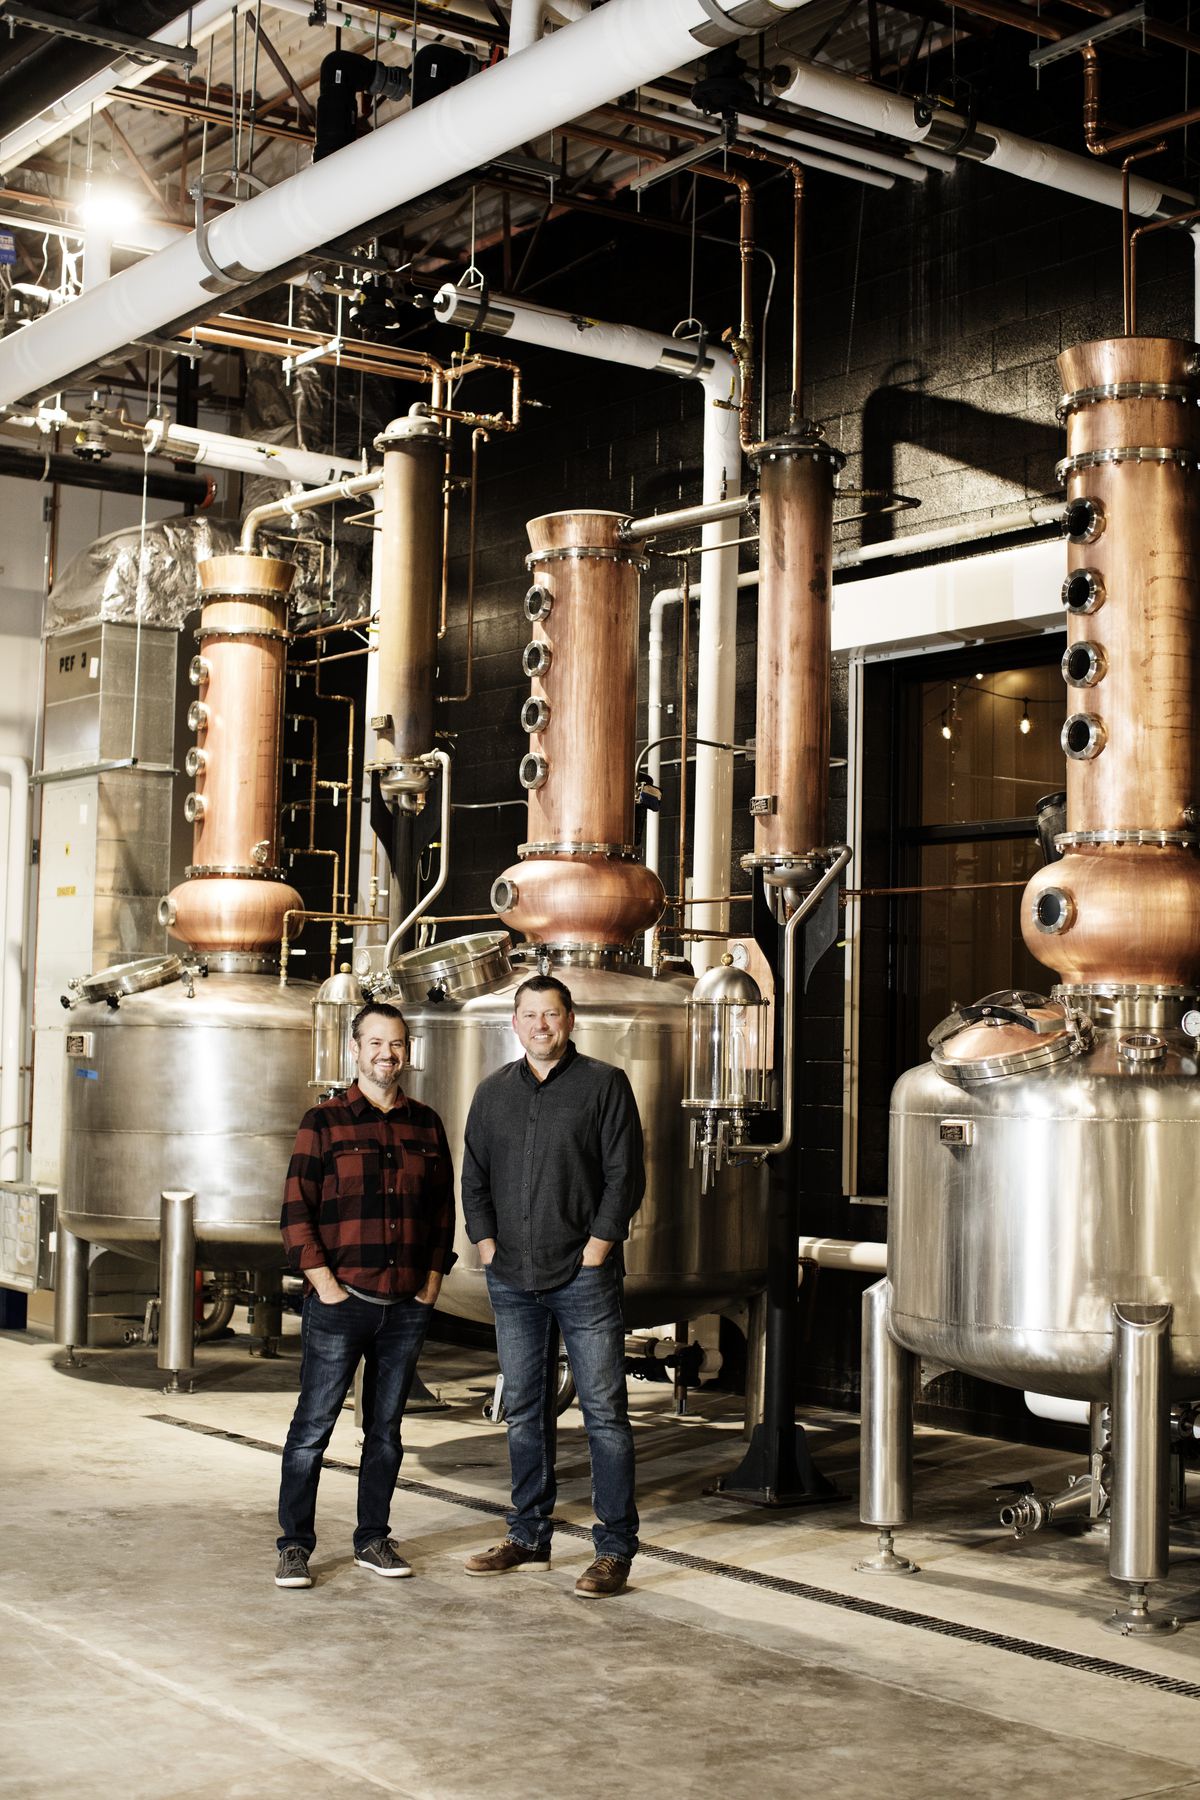 A photo of Tattersall Distilling’s founders at their shiny new distillery.